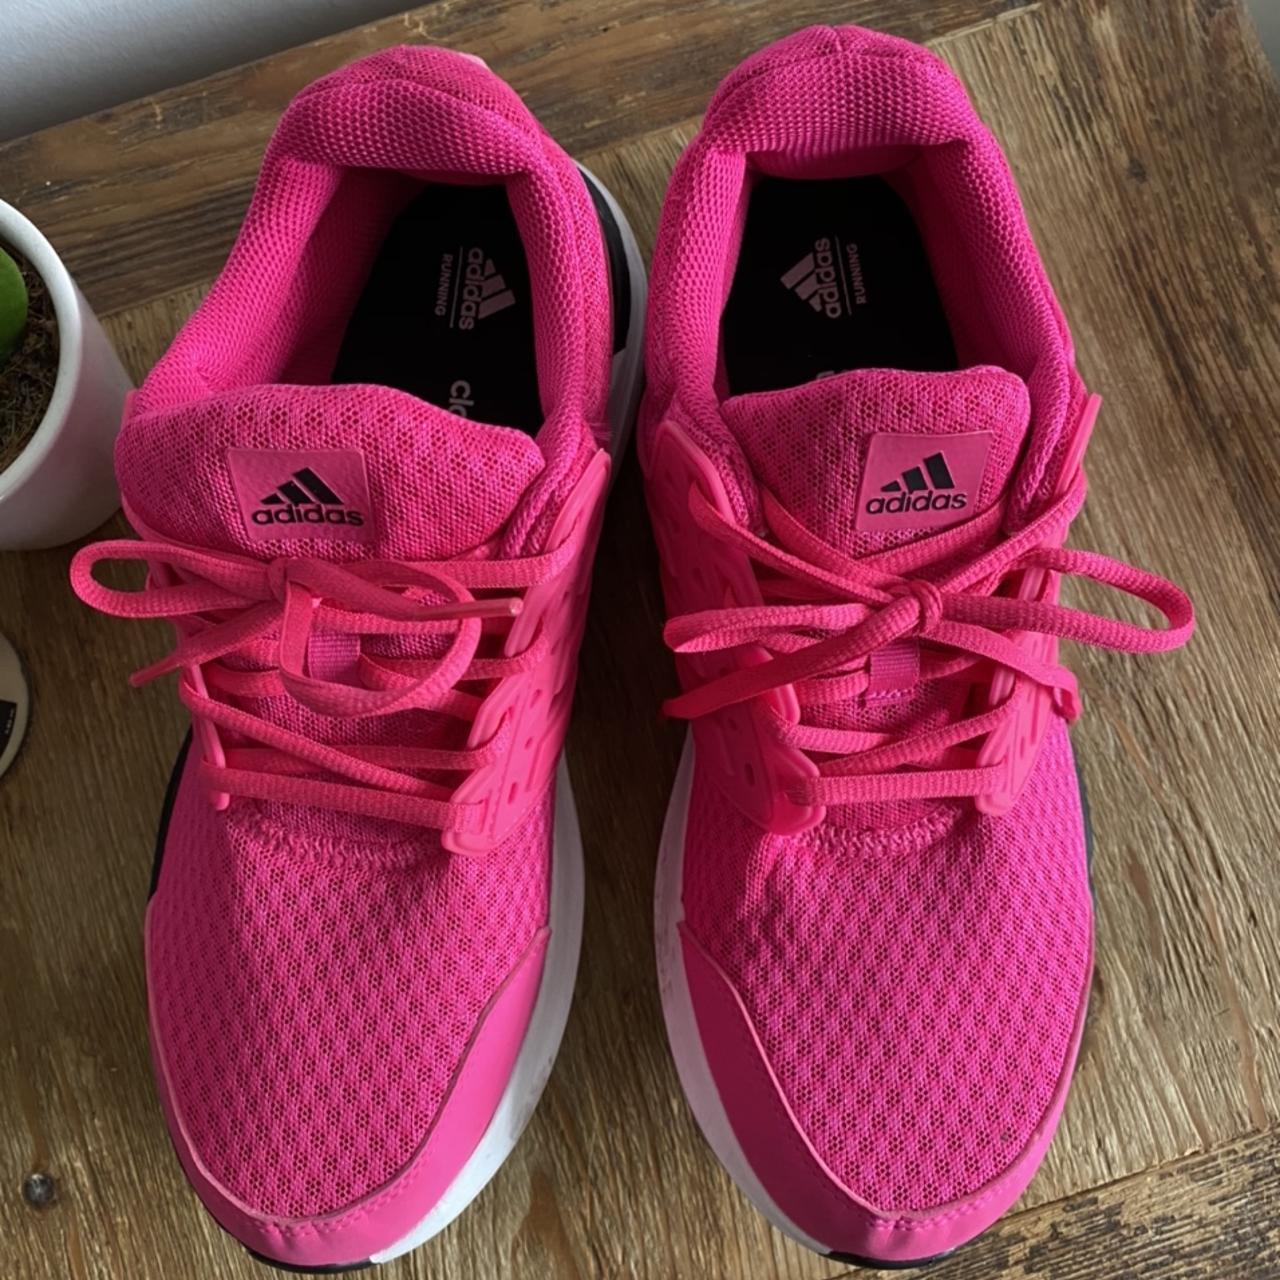 Hot pink Adidas running shoes. Worn once. True -